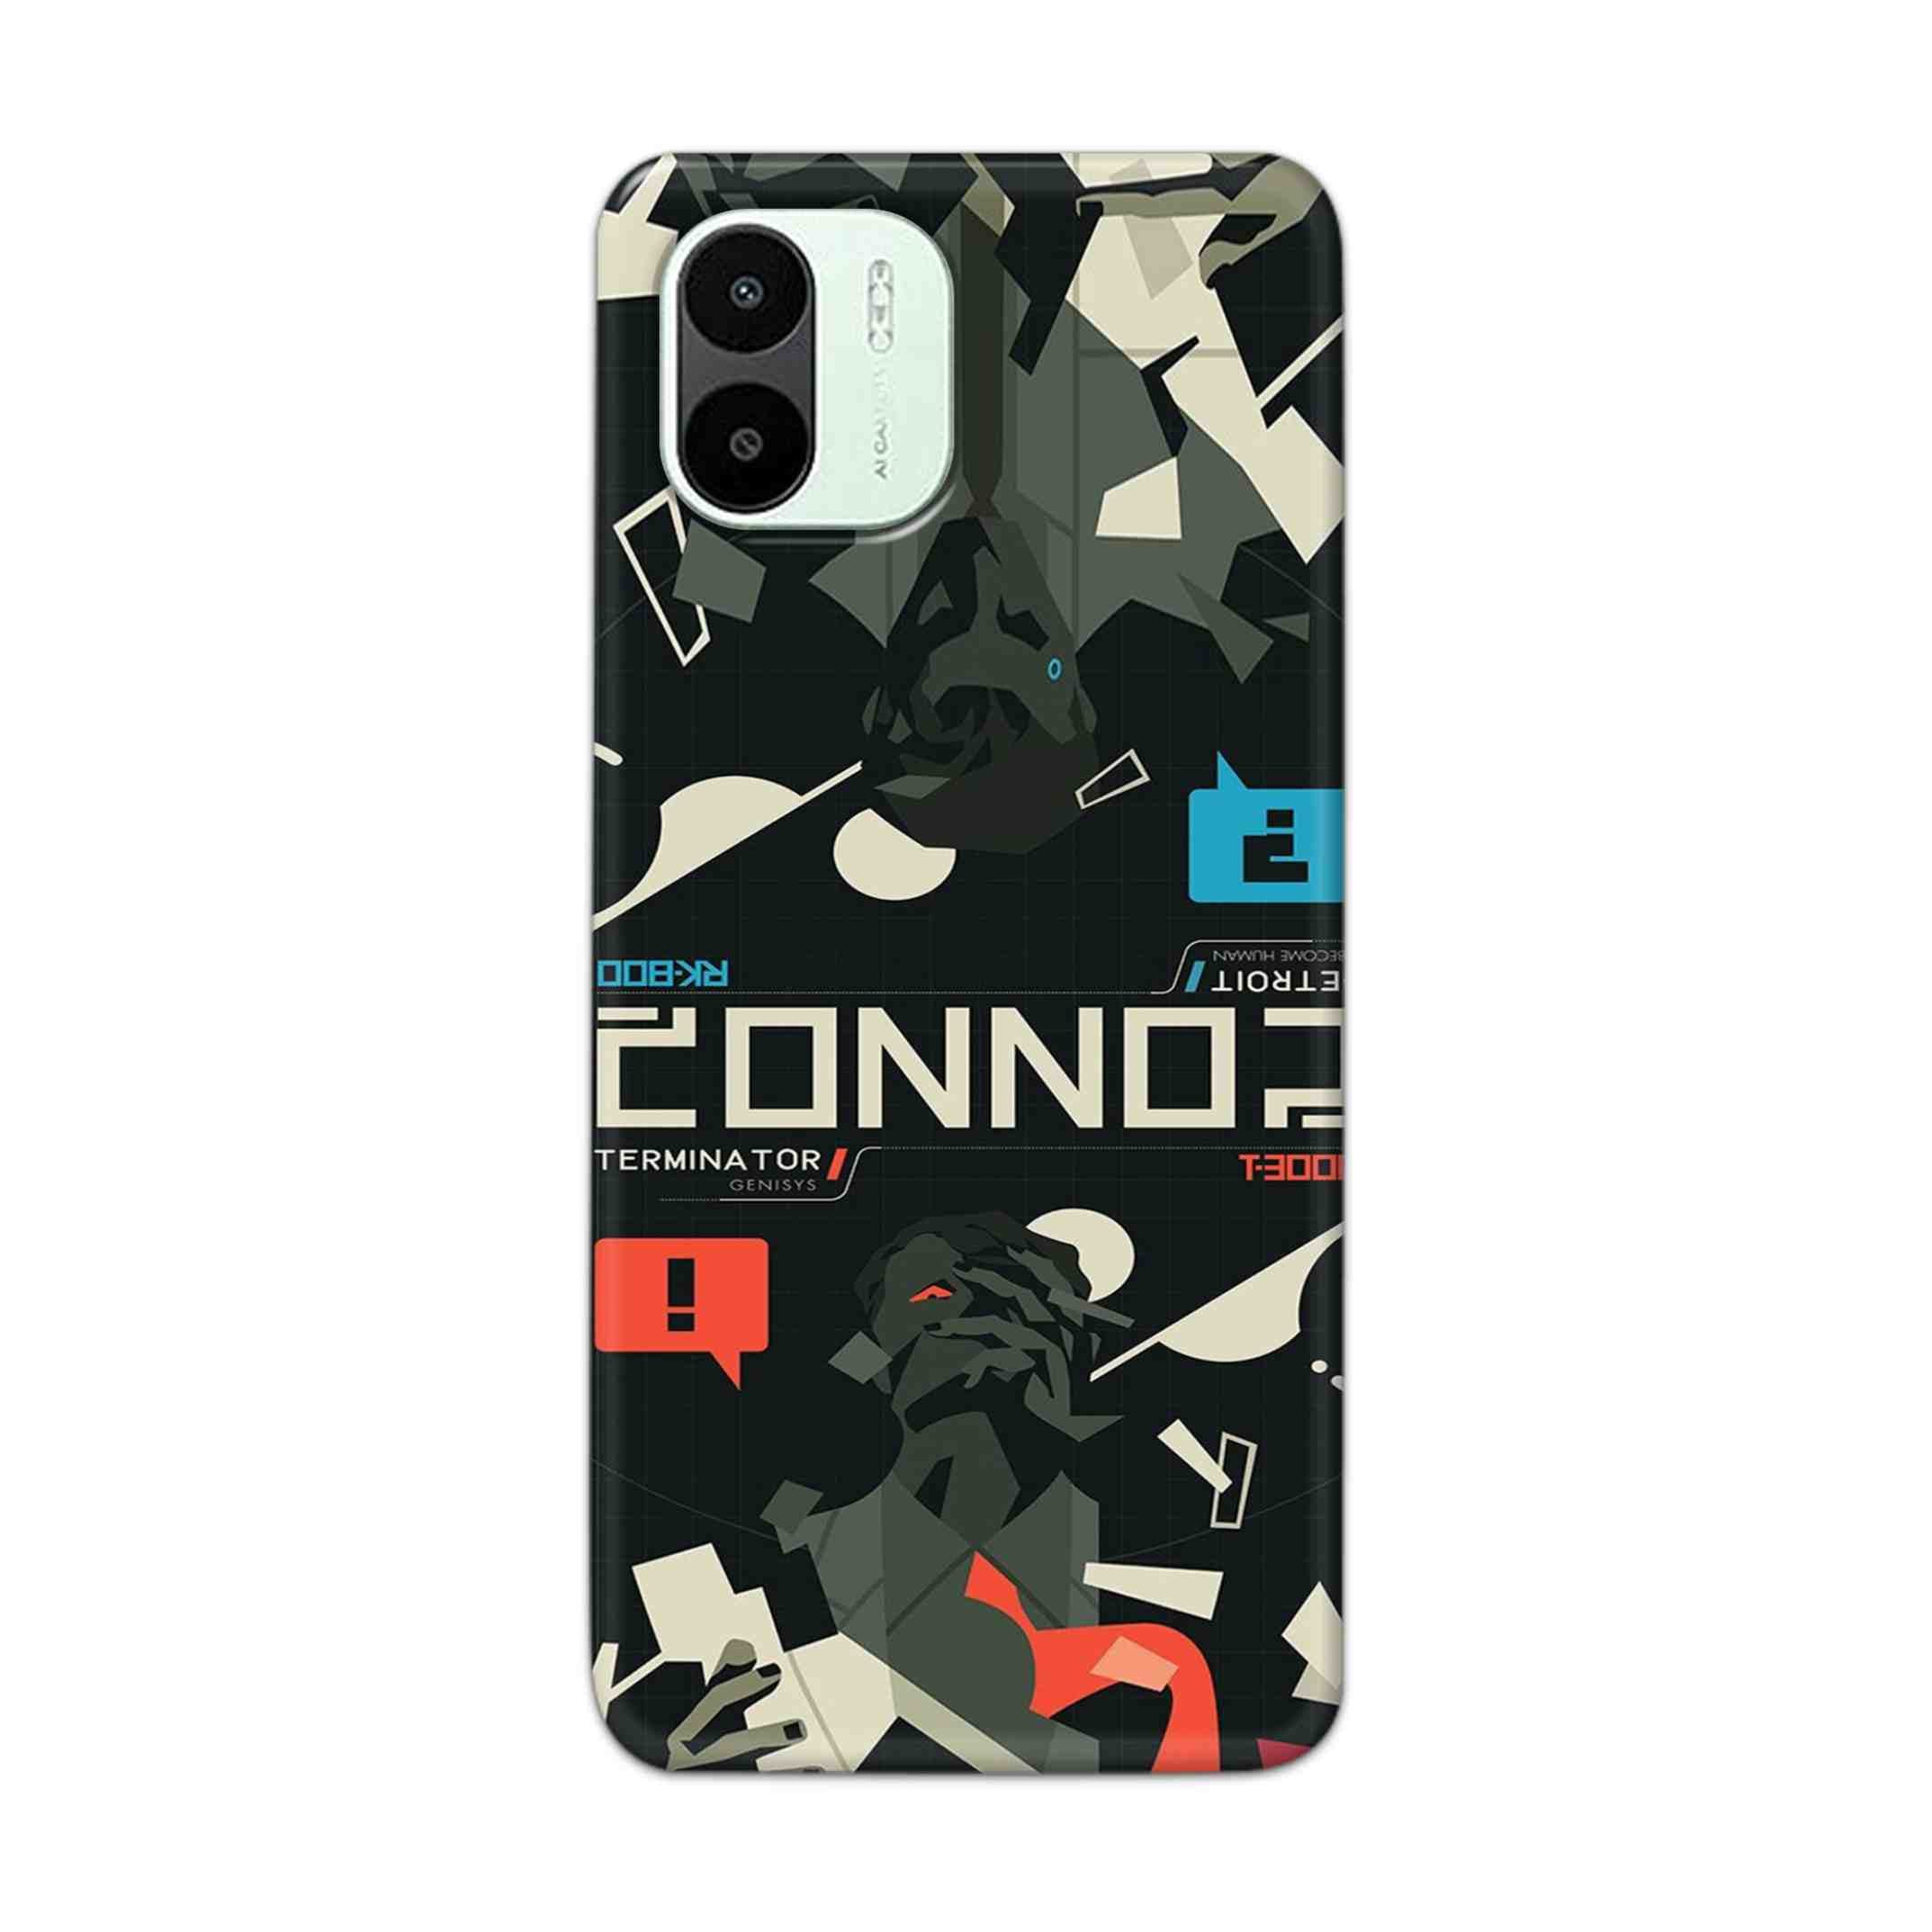 Buy Terminator Hard Back Mobile Phone Case Cover For Xiaomi Redmi A1 5G Online